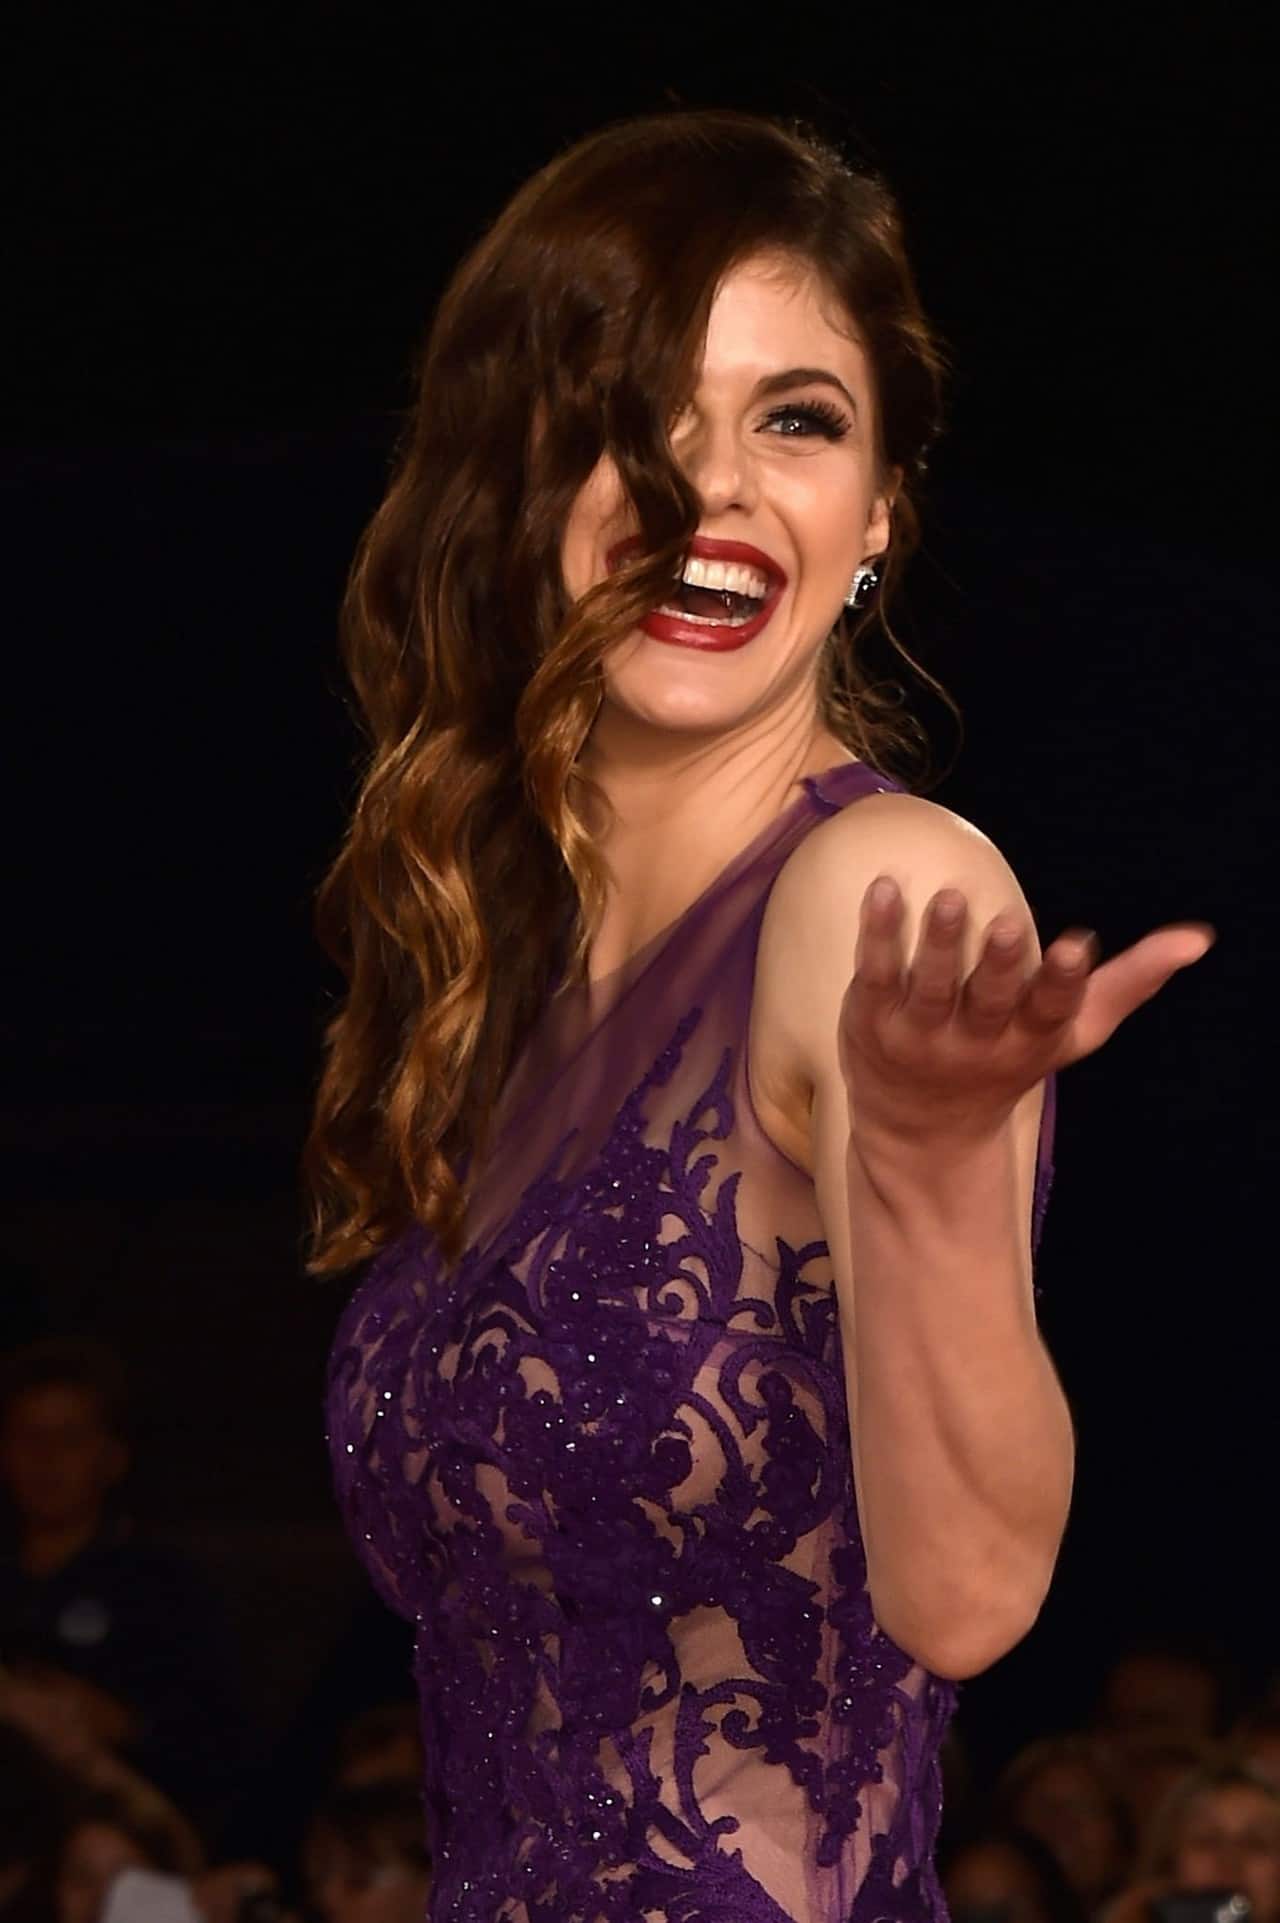 Alexandra Daddario Stuns in Sheer Purple Gown at "Burying the Ex" Premiere